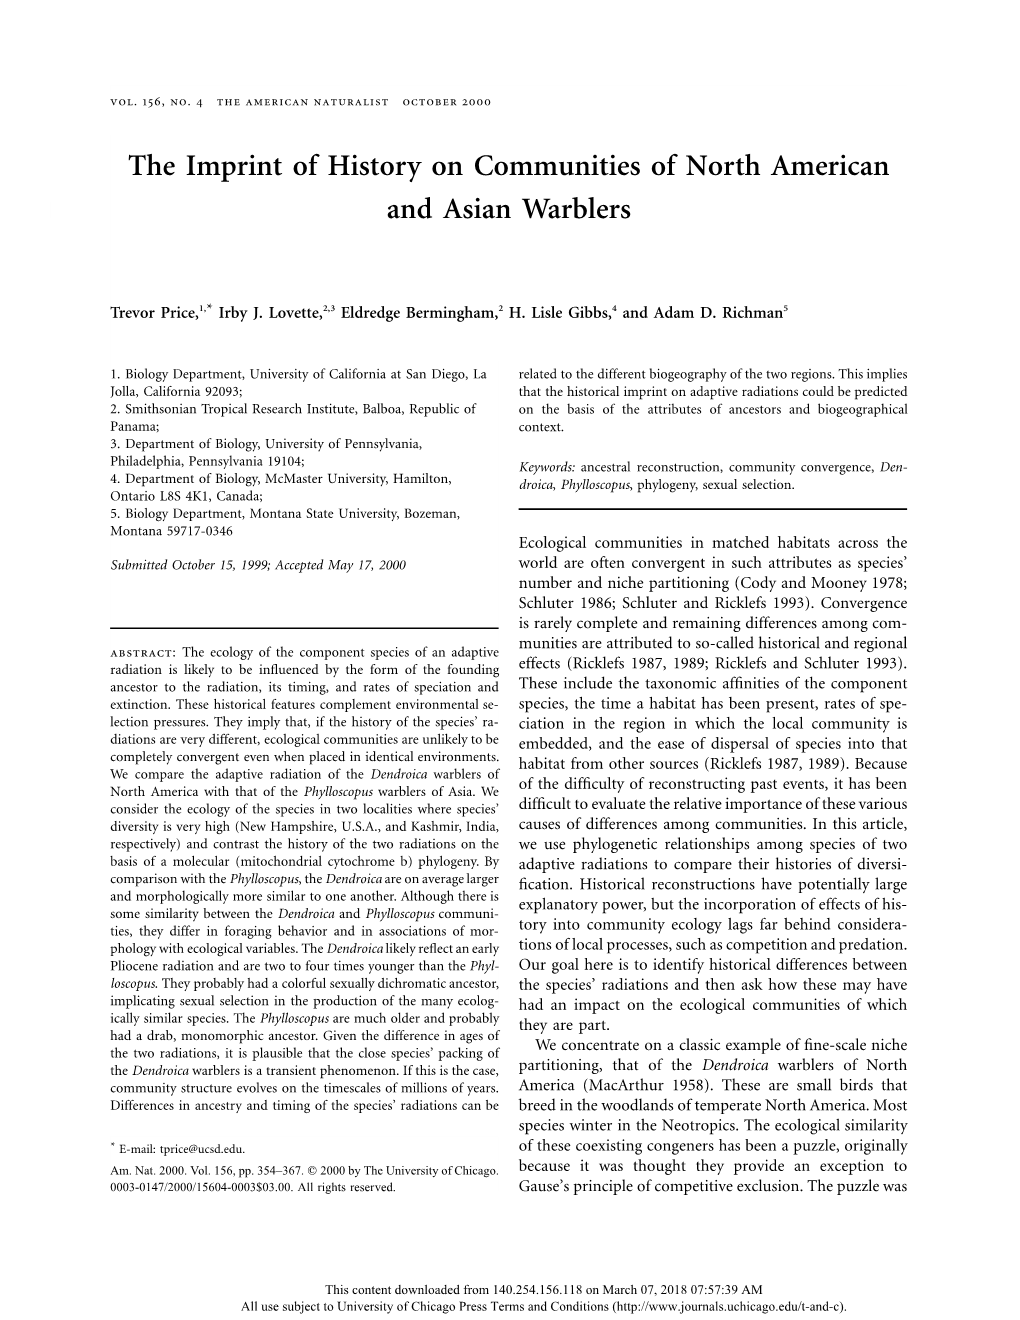 The Imprint of History on Communities of North American and Asian Warblers